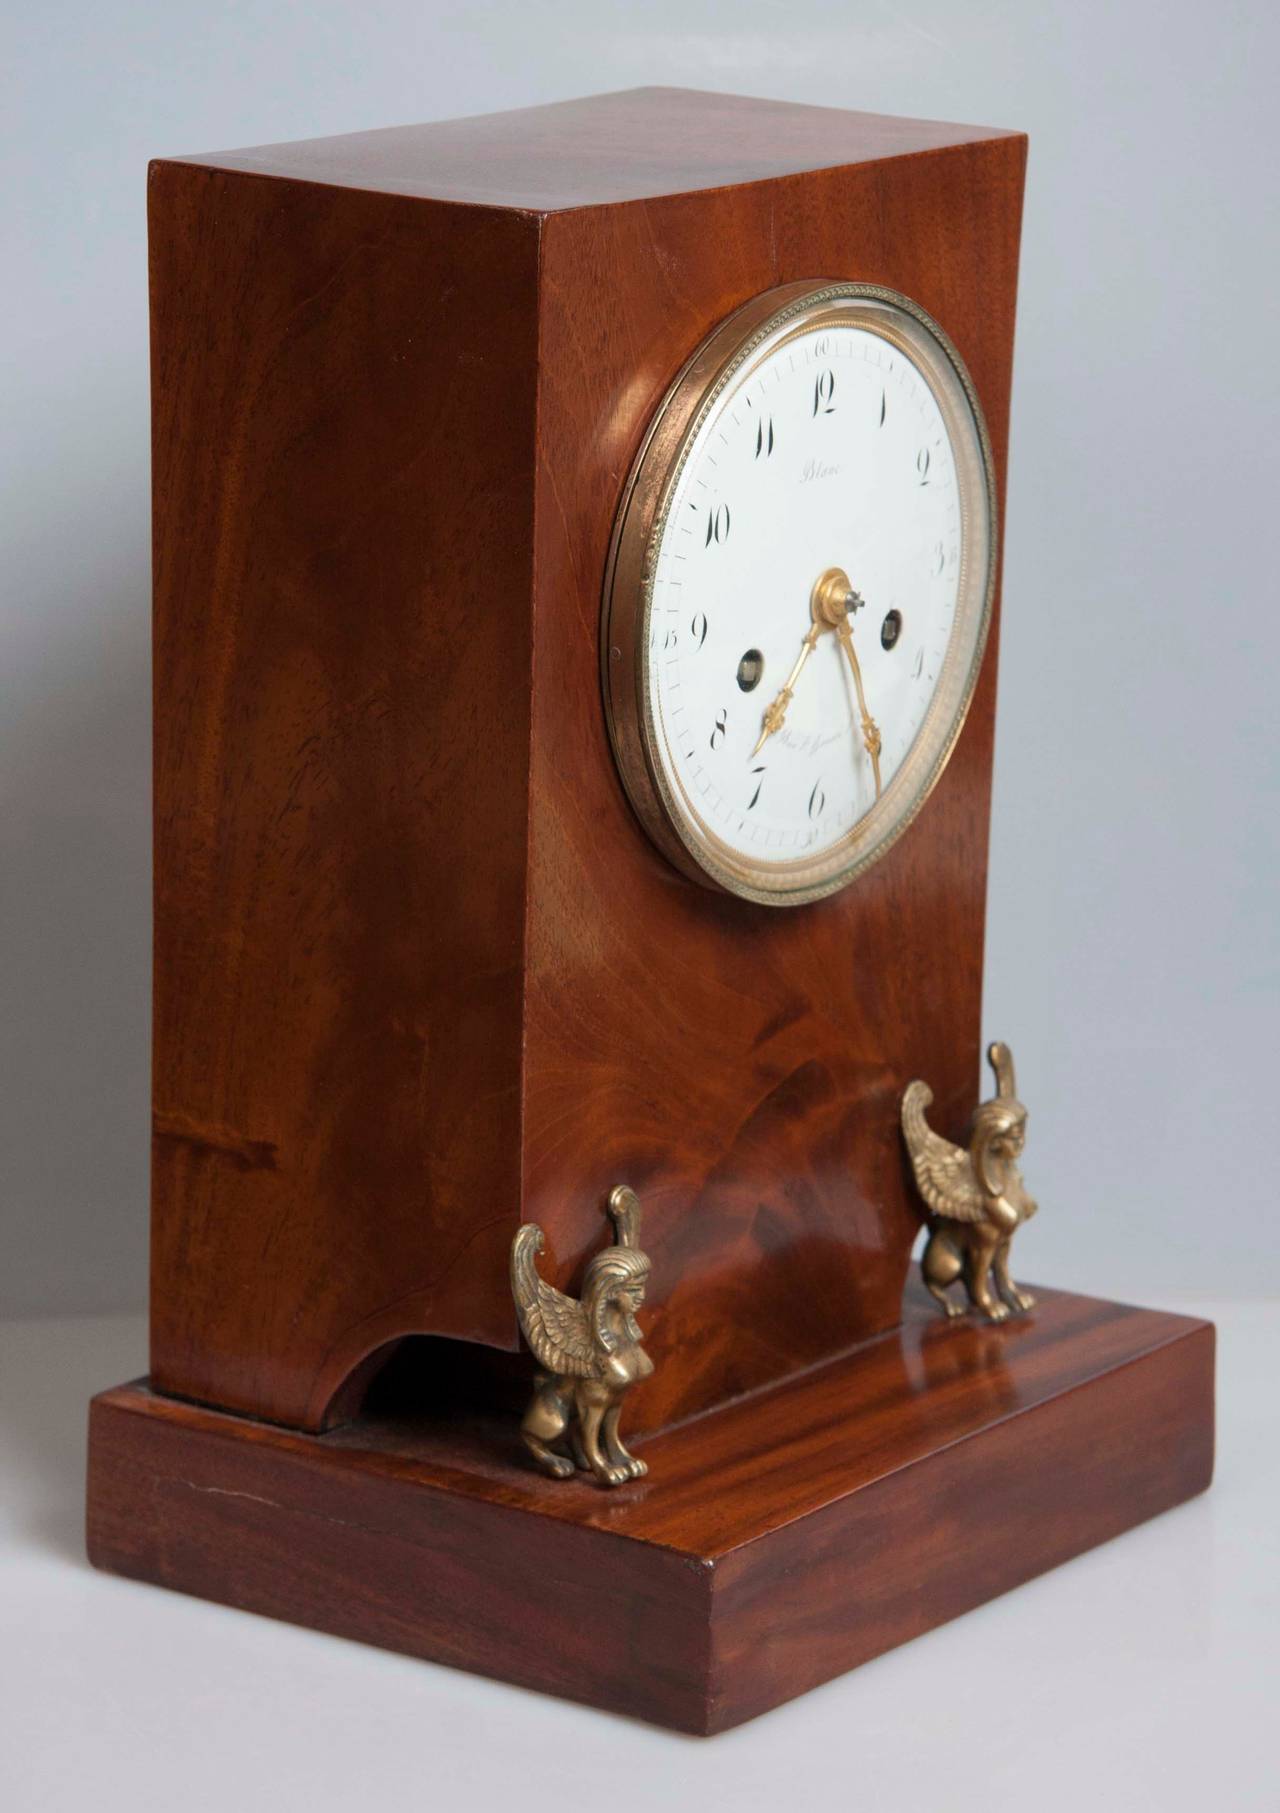 A 19th century French Empire mahogany mantel clock with a circular white enamel dial and Arabic numerals, signed 